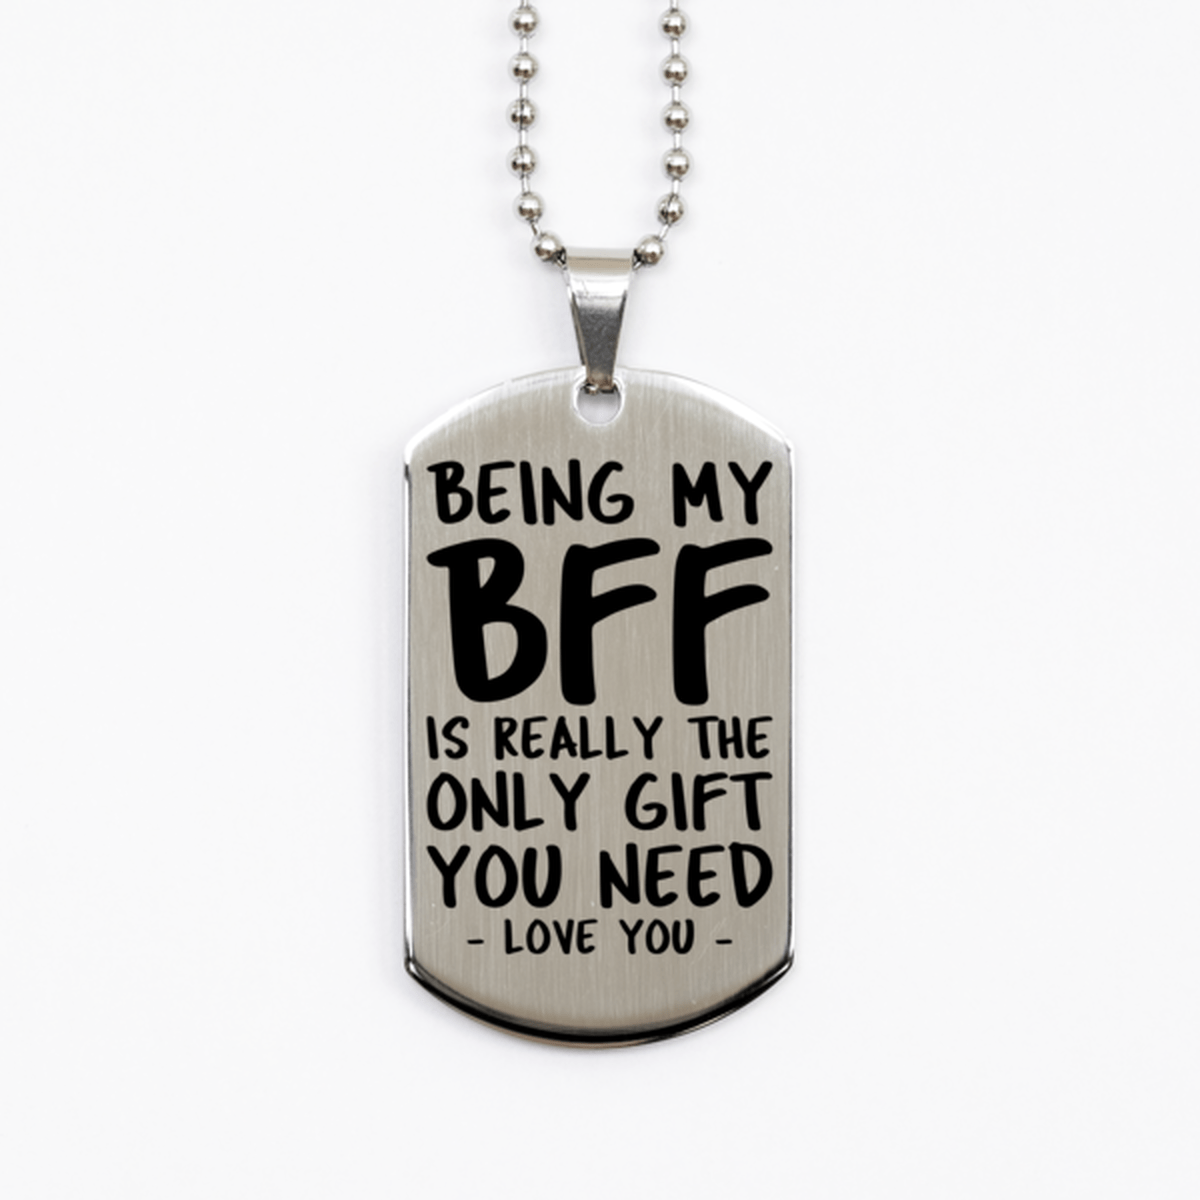 Funny BFF Silver Dog Tag Necklace, Being My BFF Is Really the Only Gift You Need, Best Birthday Gifts for BFF